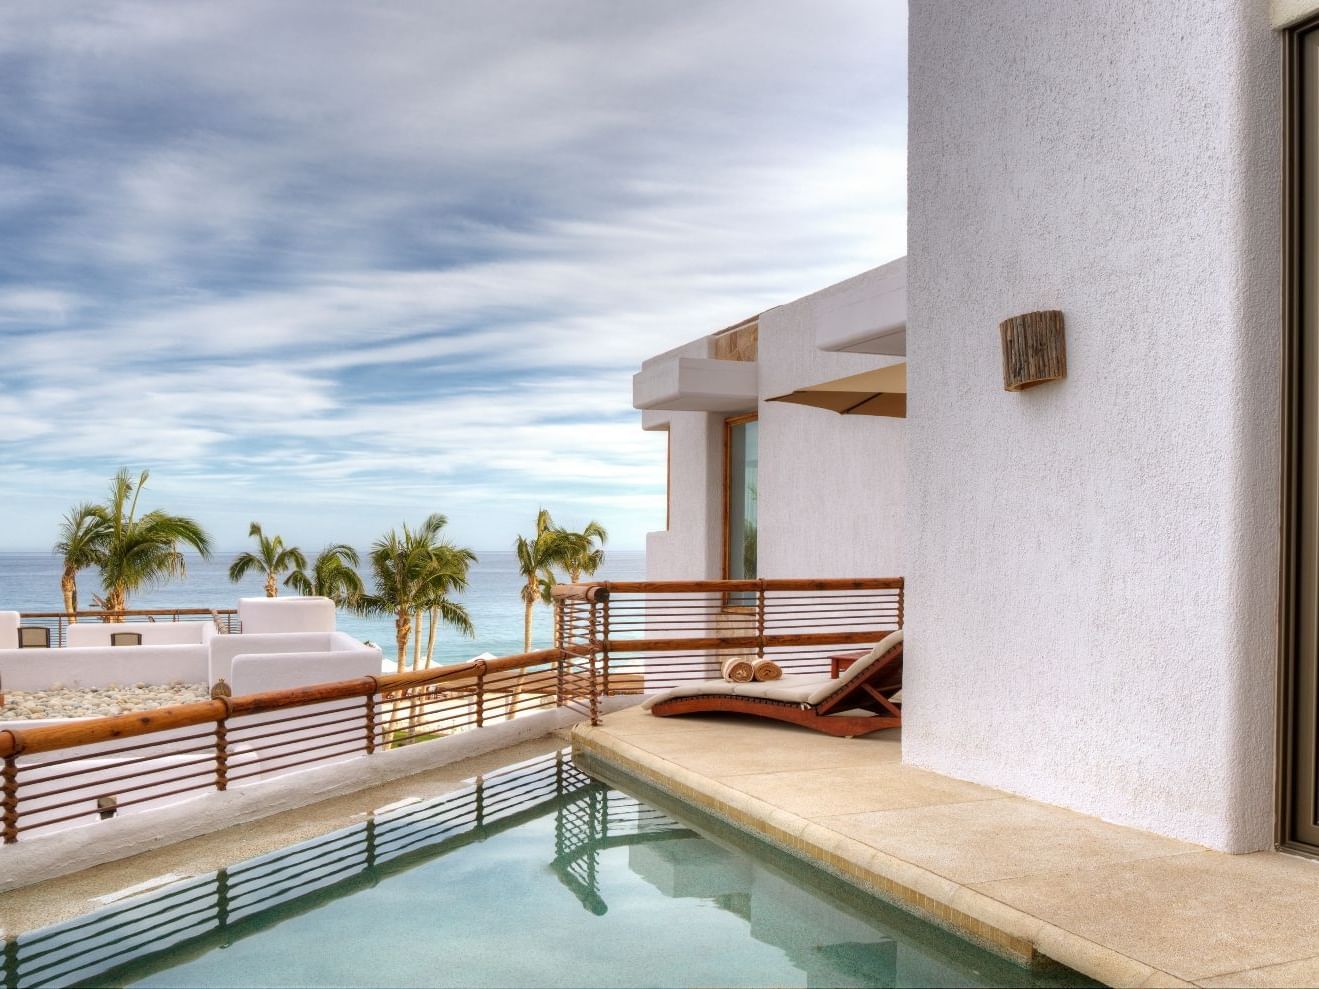 Lounge chair by a pool in a Master Suite at Marquis Los Cabos